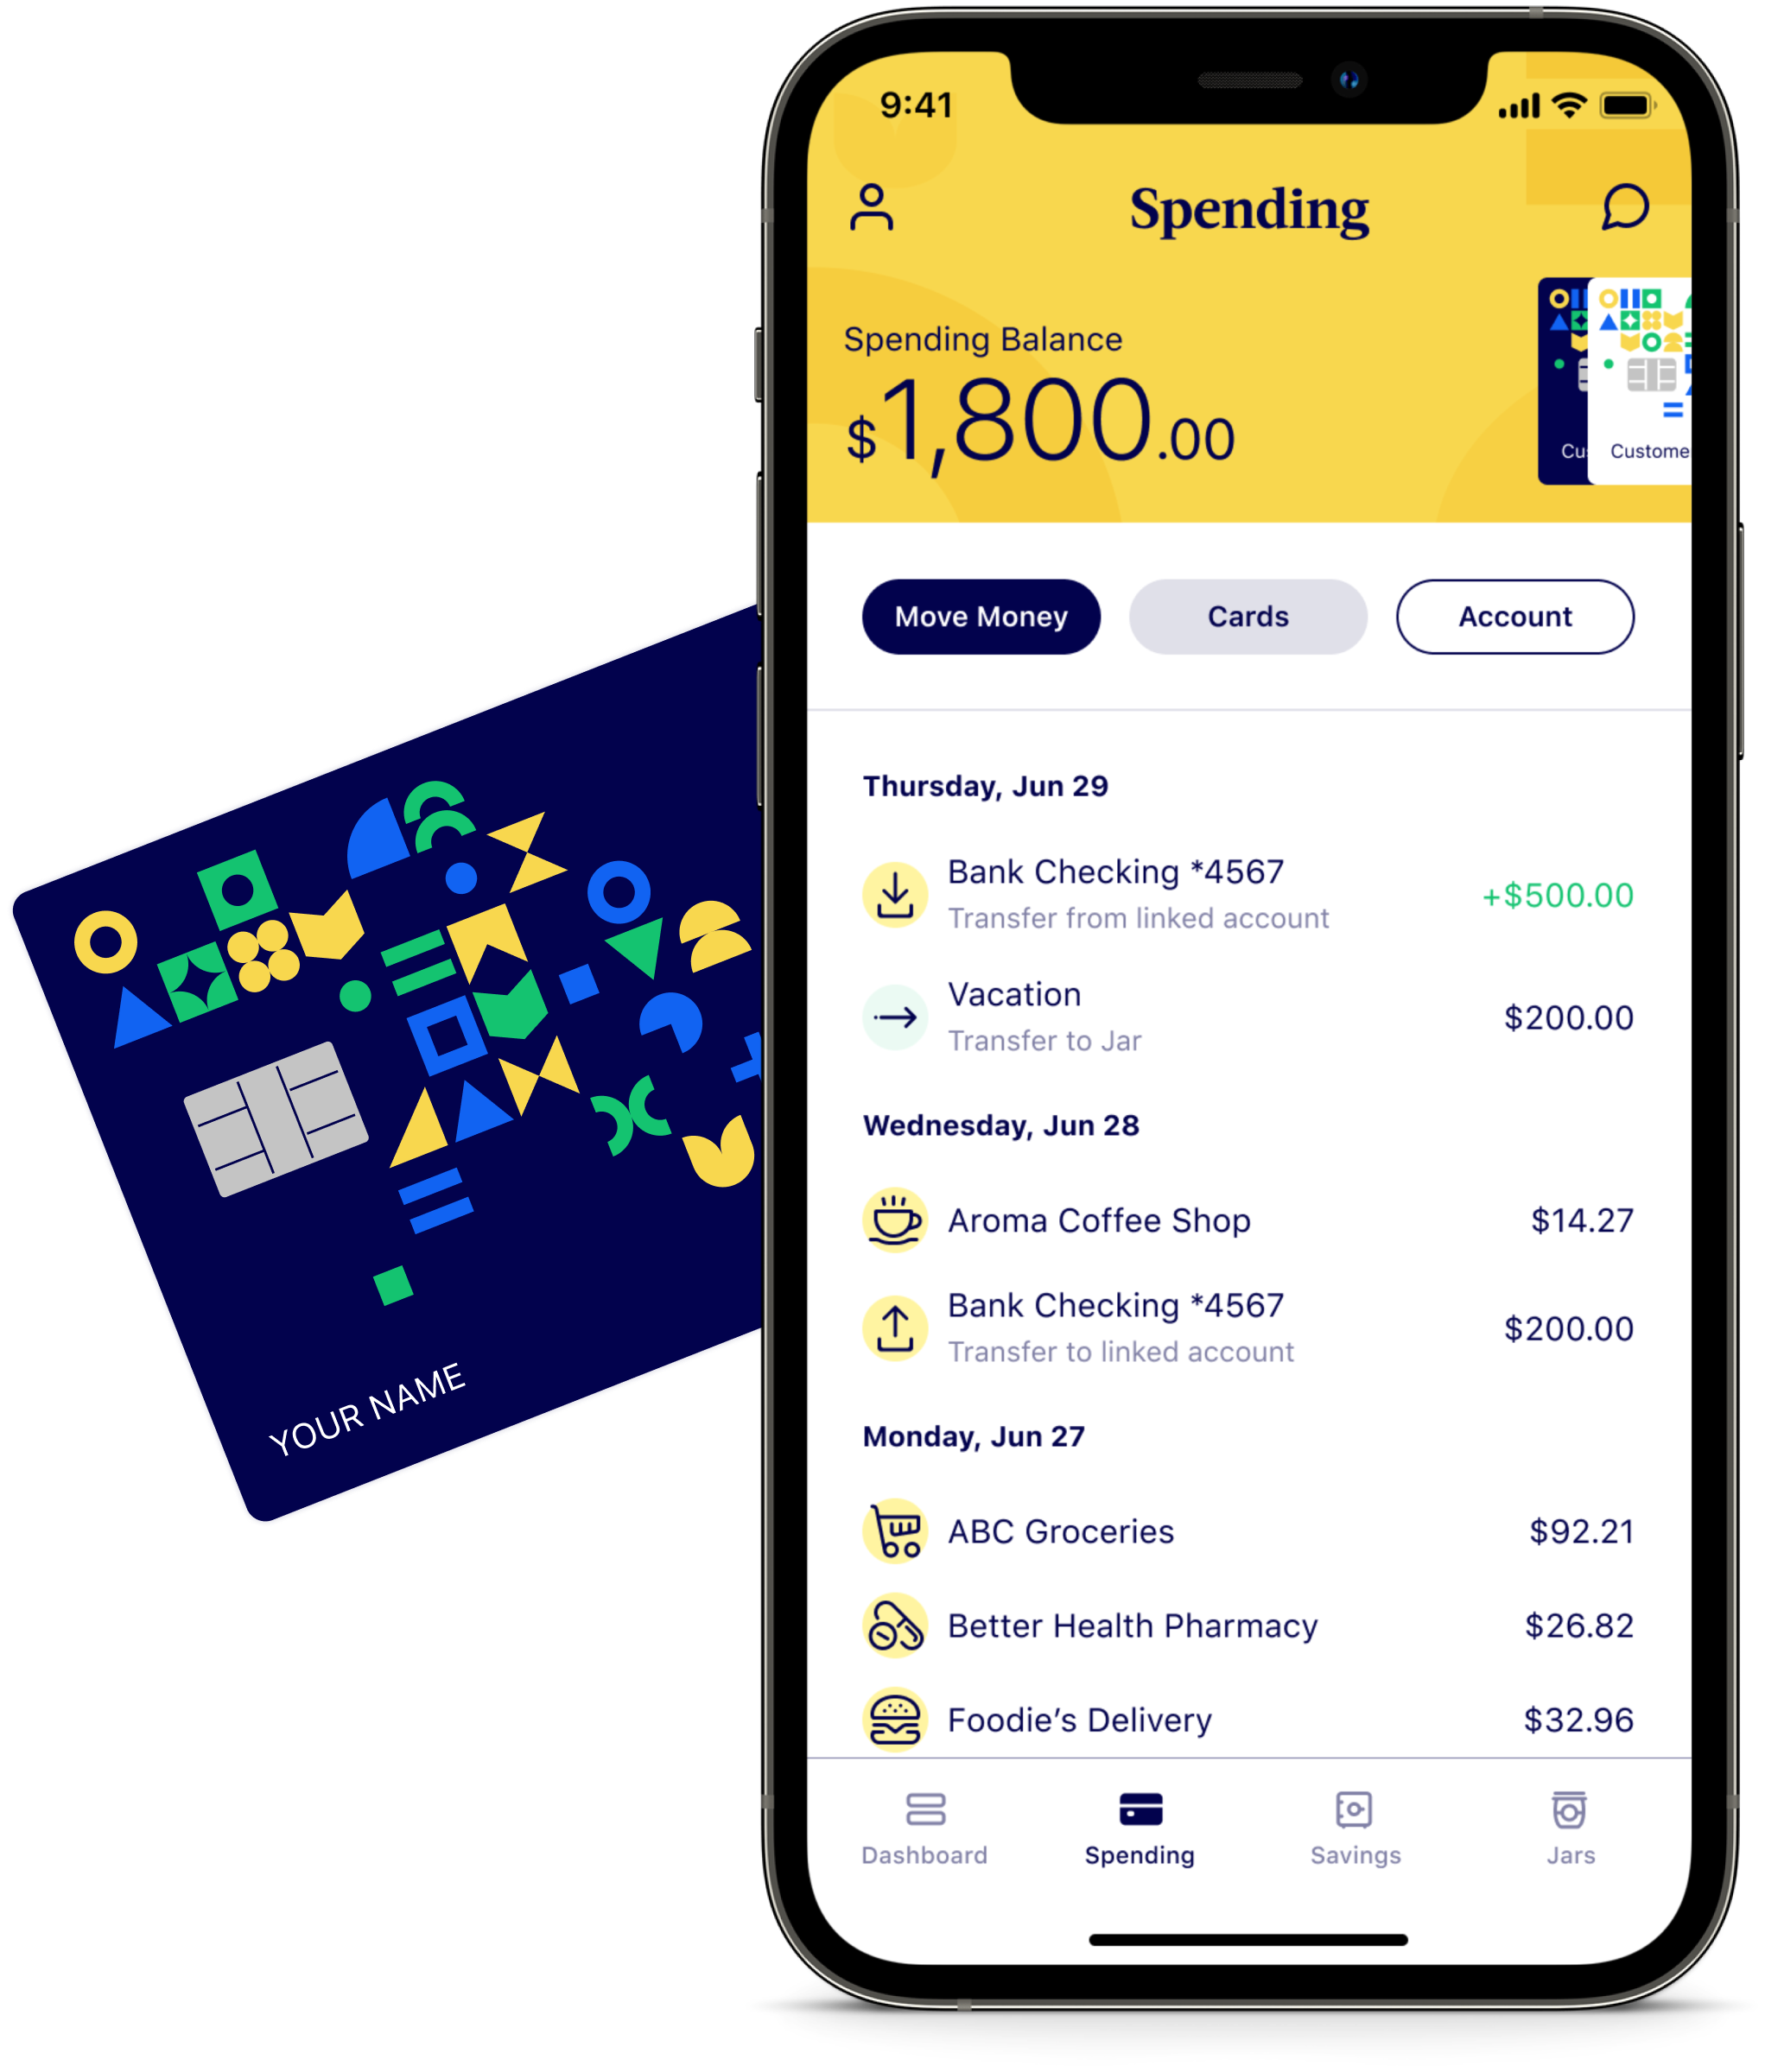 Image showing Milli's mobile banking Spending page with transactions and the debit card